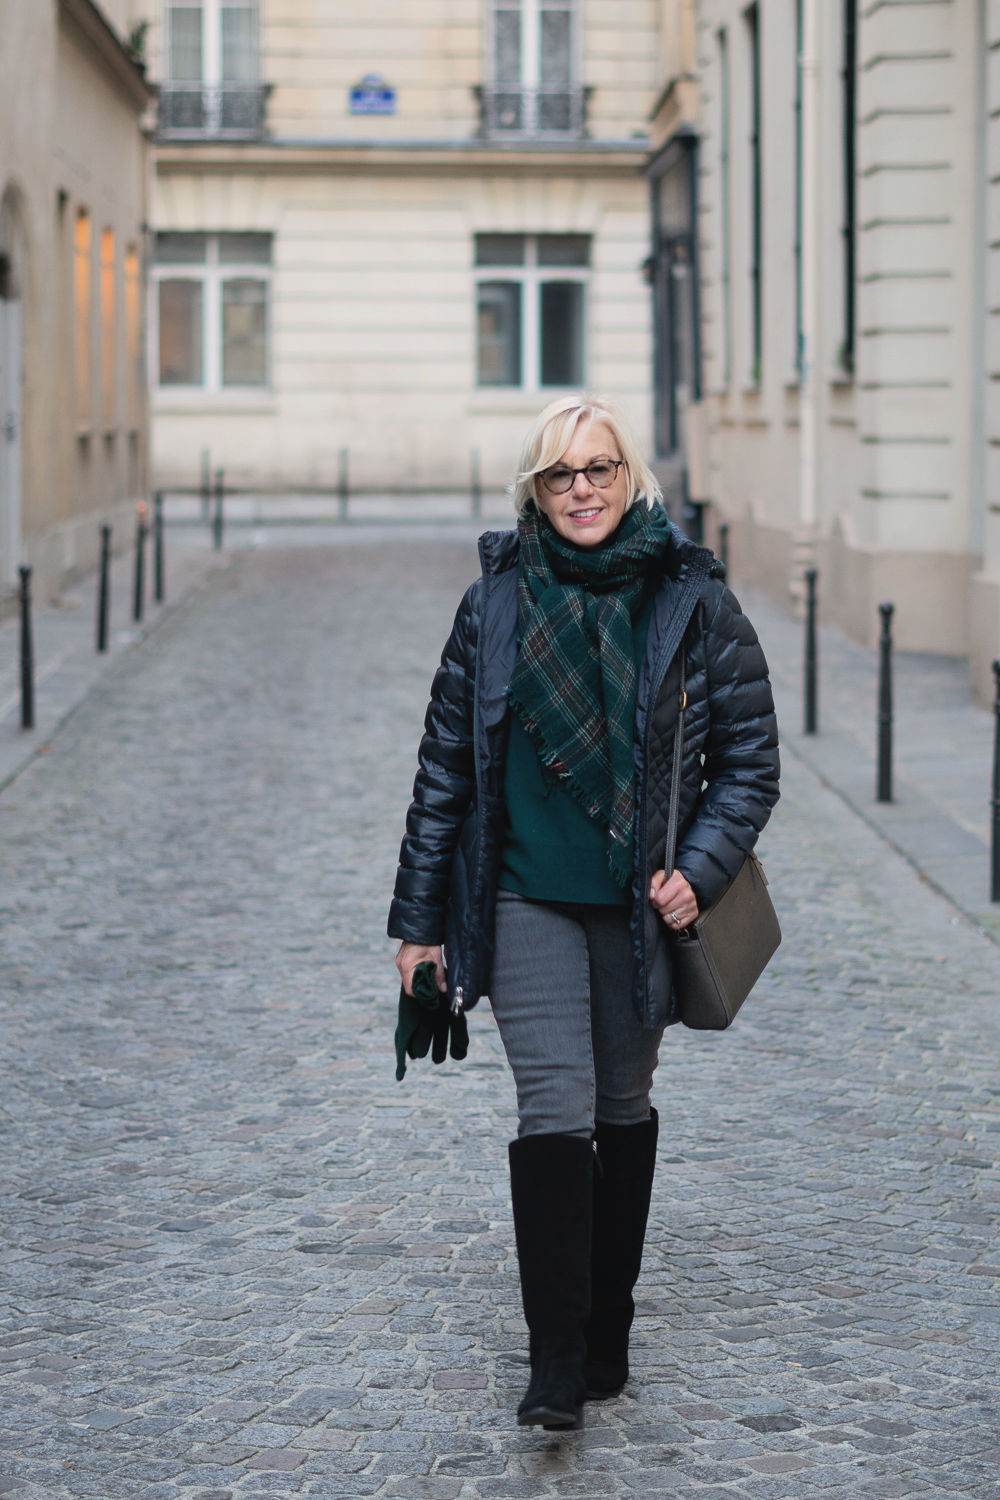 Winter travel outfit: Susan B. wears a navy puffer jacket, forest green top and scarf, grey jeans and black knee boots. Details at une femme d'un certain age.